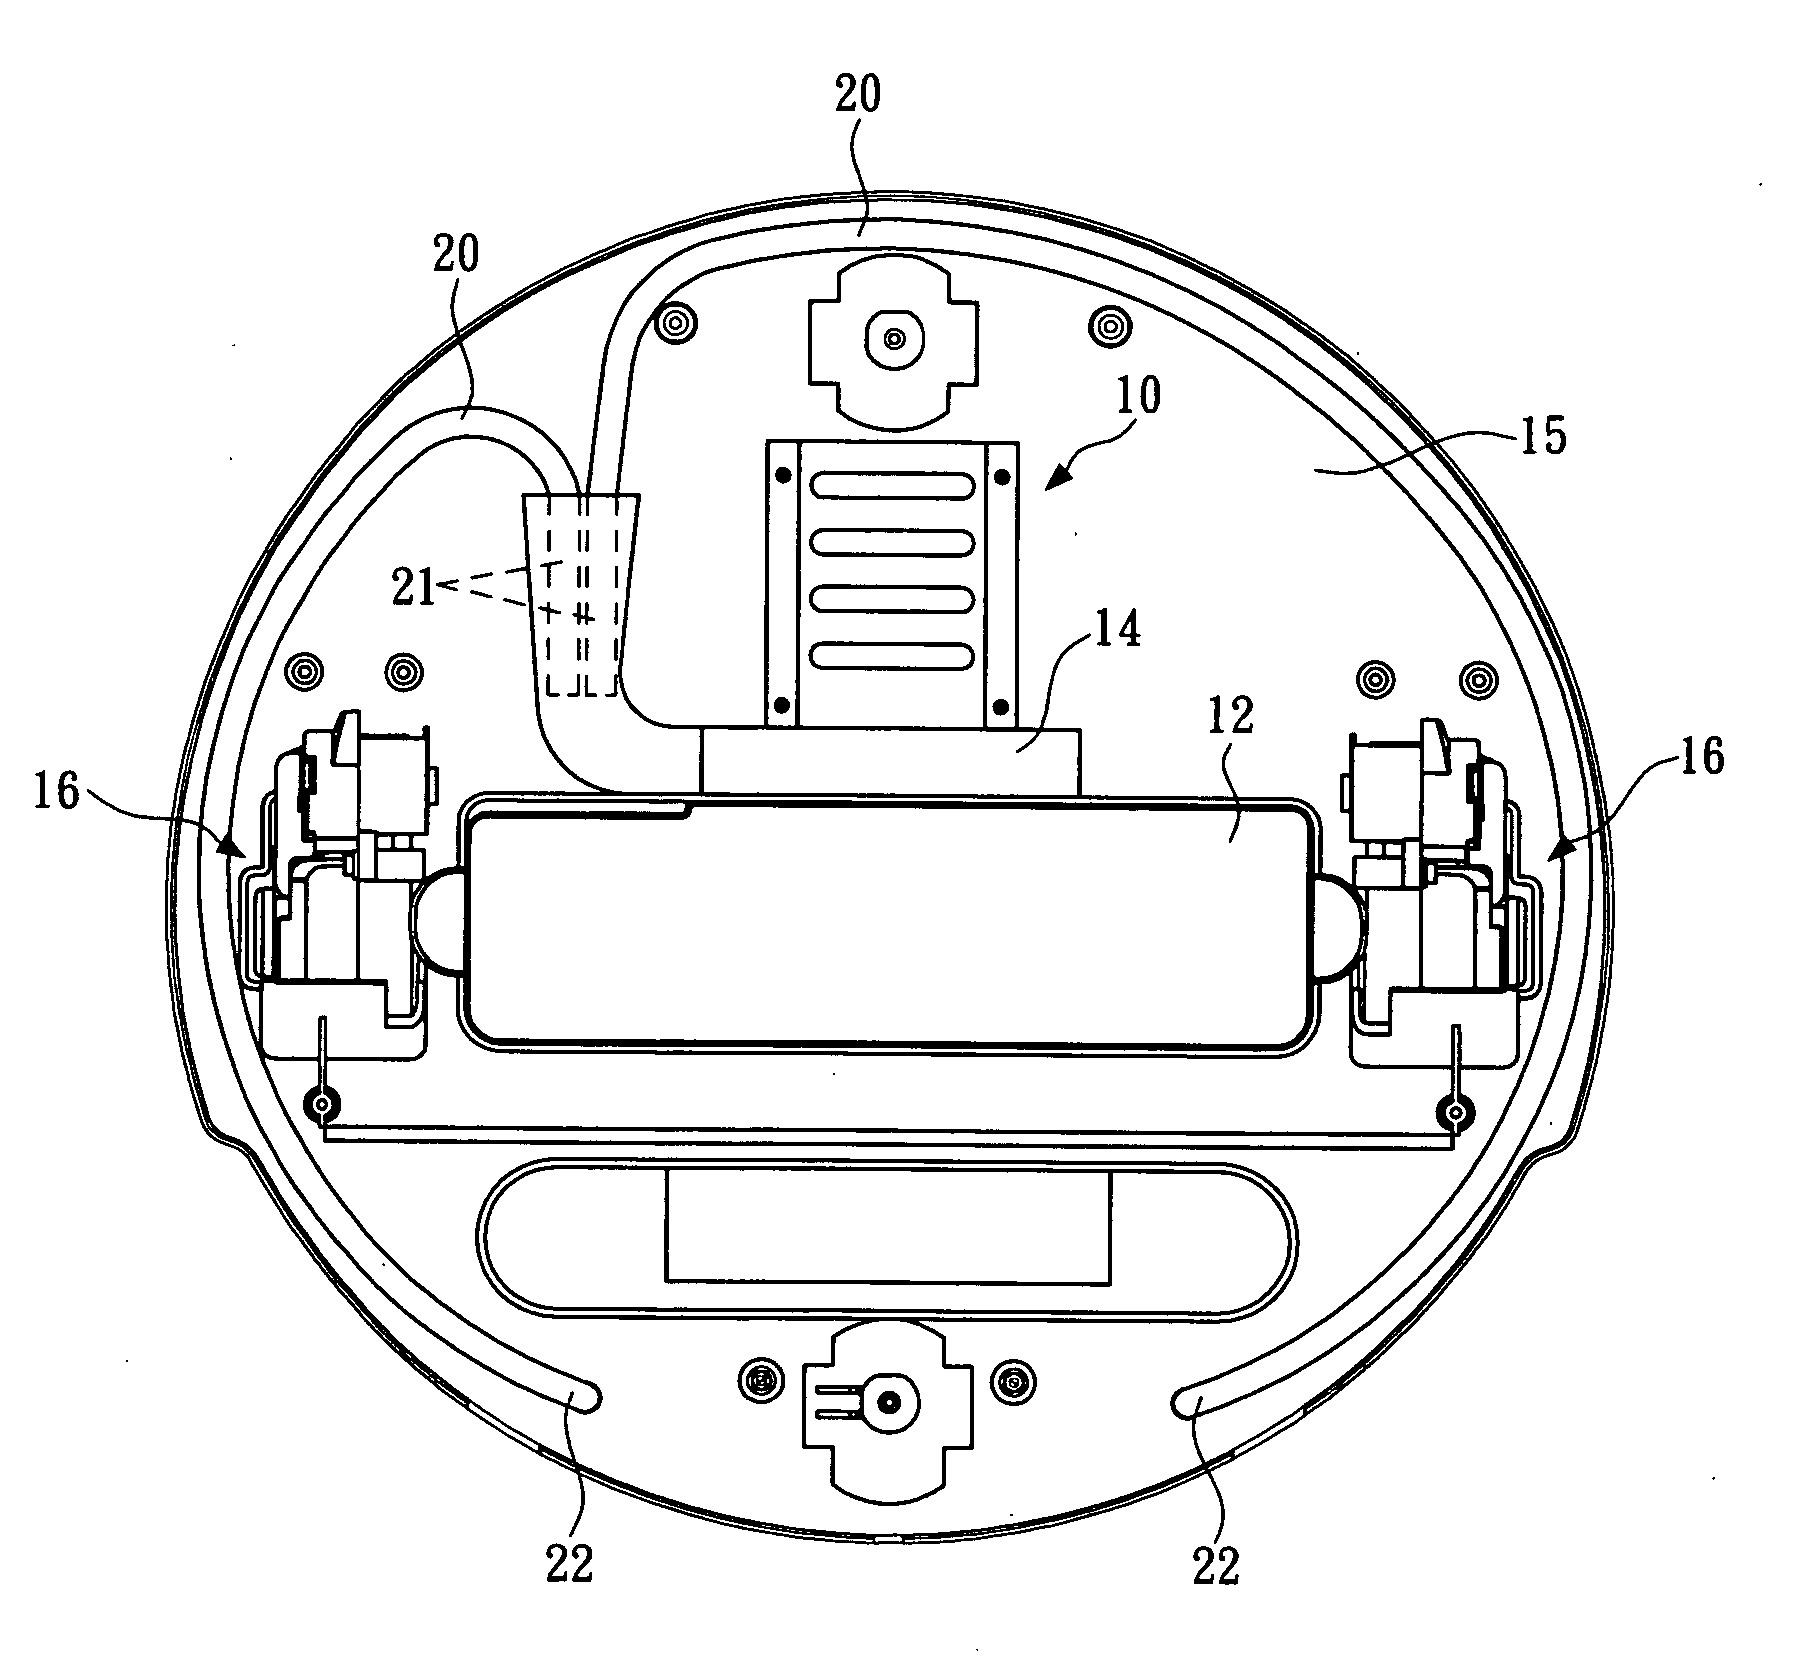 Dust-collecting auxiliary device for vacuum cleaner